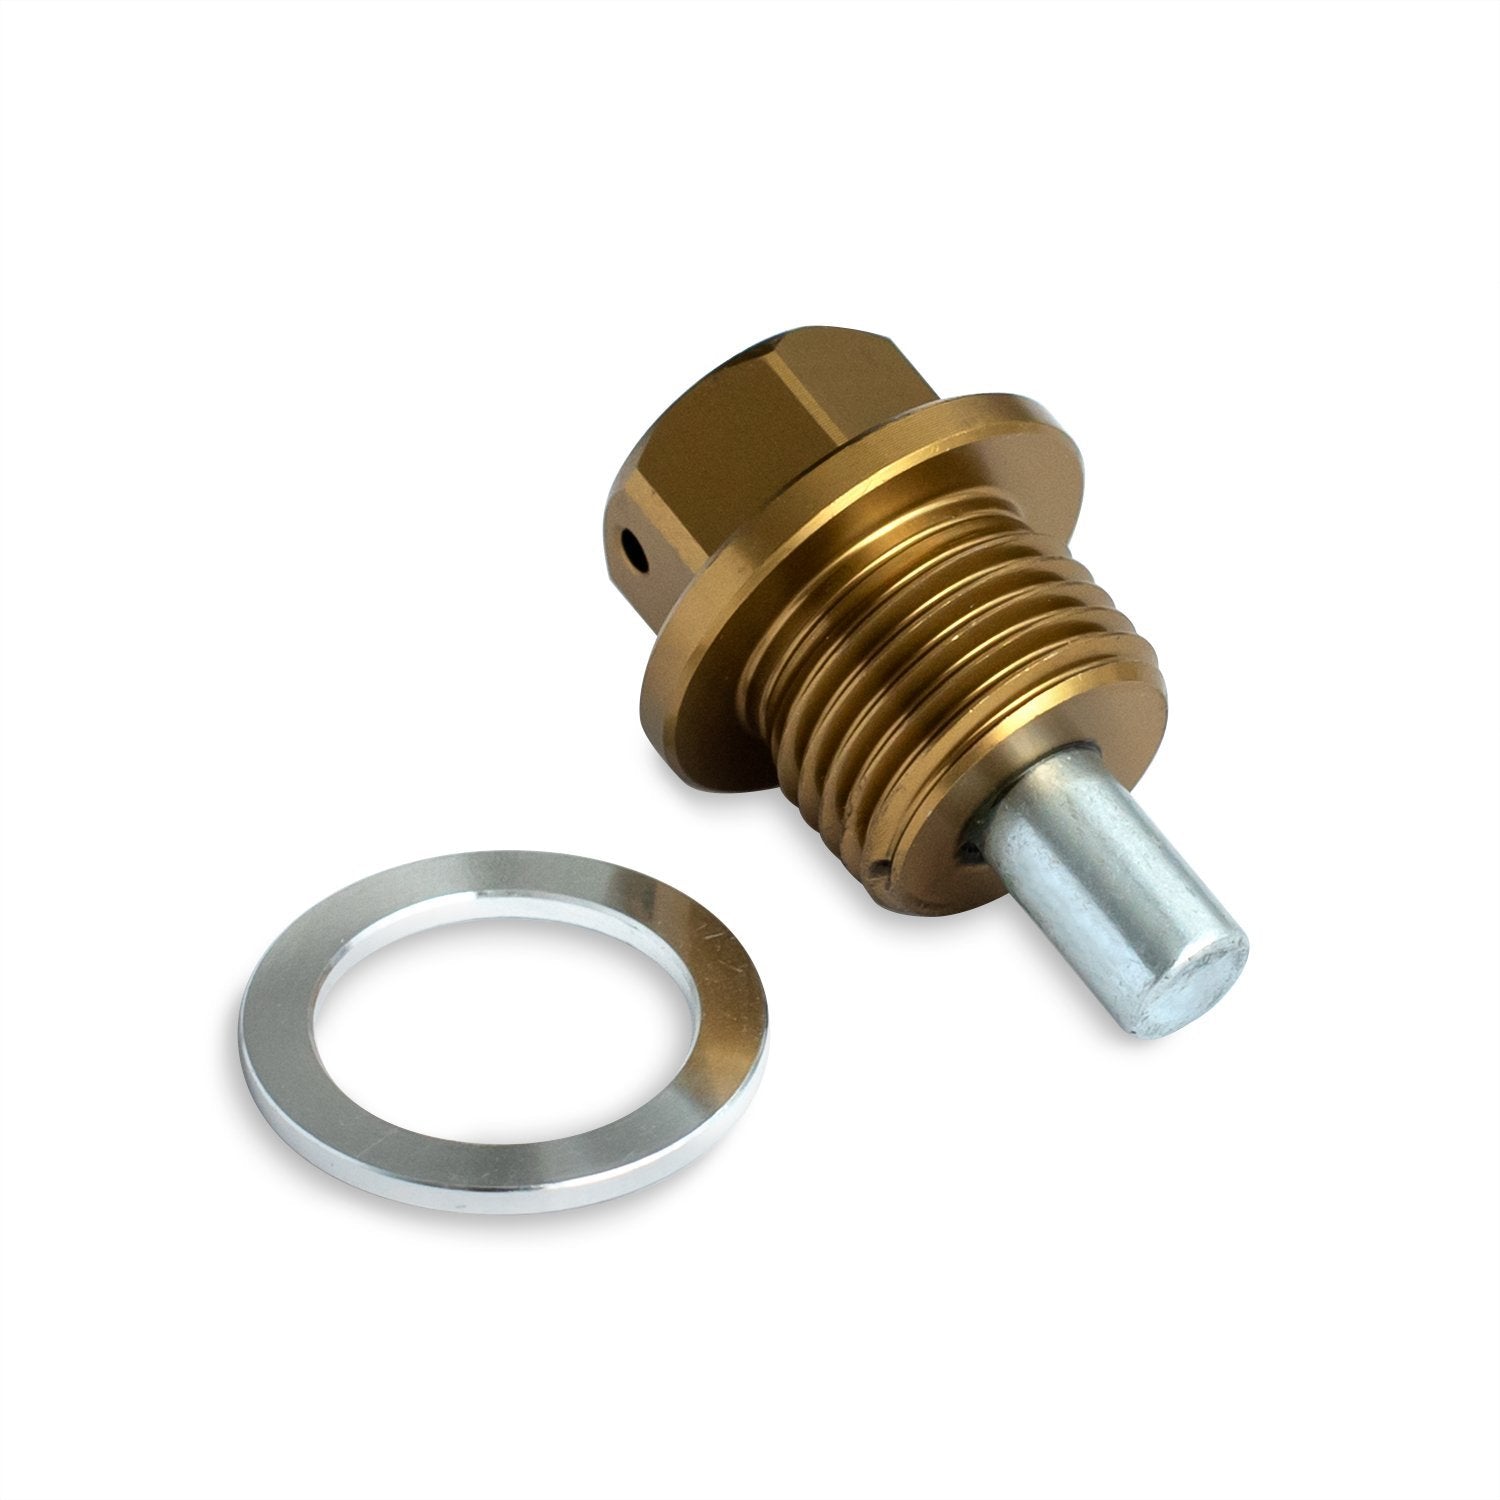 Magnetic Oil Drain Plug for Engine Pan and Transmission - M14 x 1.5